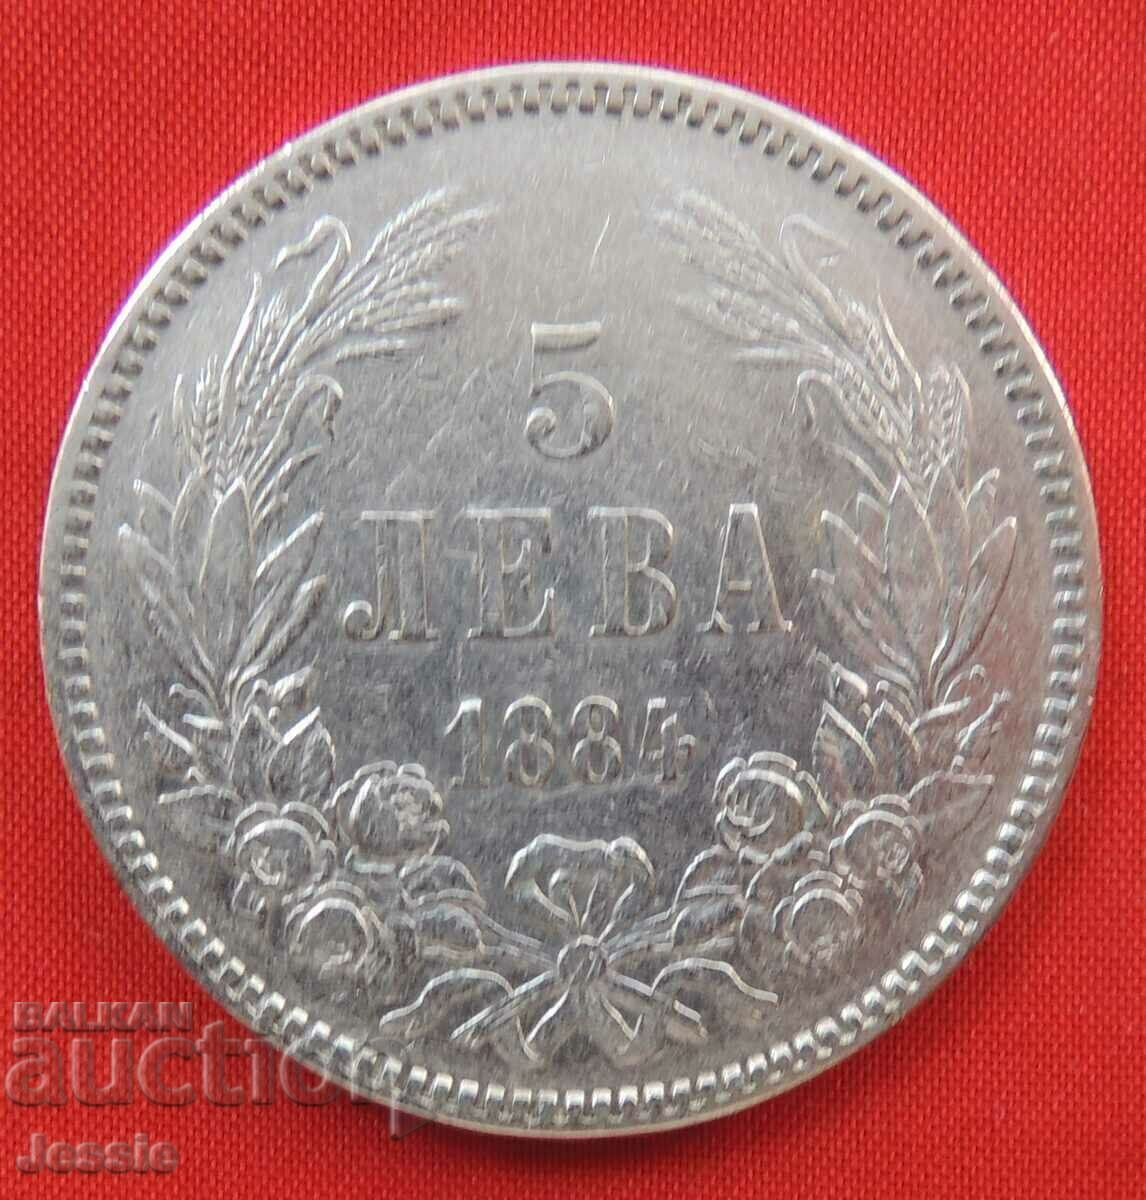 5 BGN 1884 silver NO MADE IN CHINA!